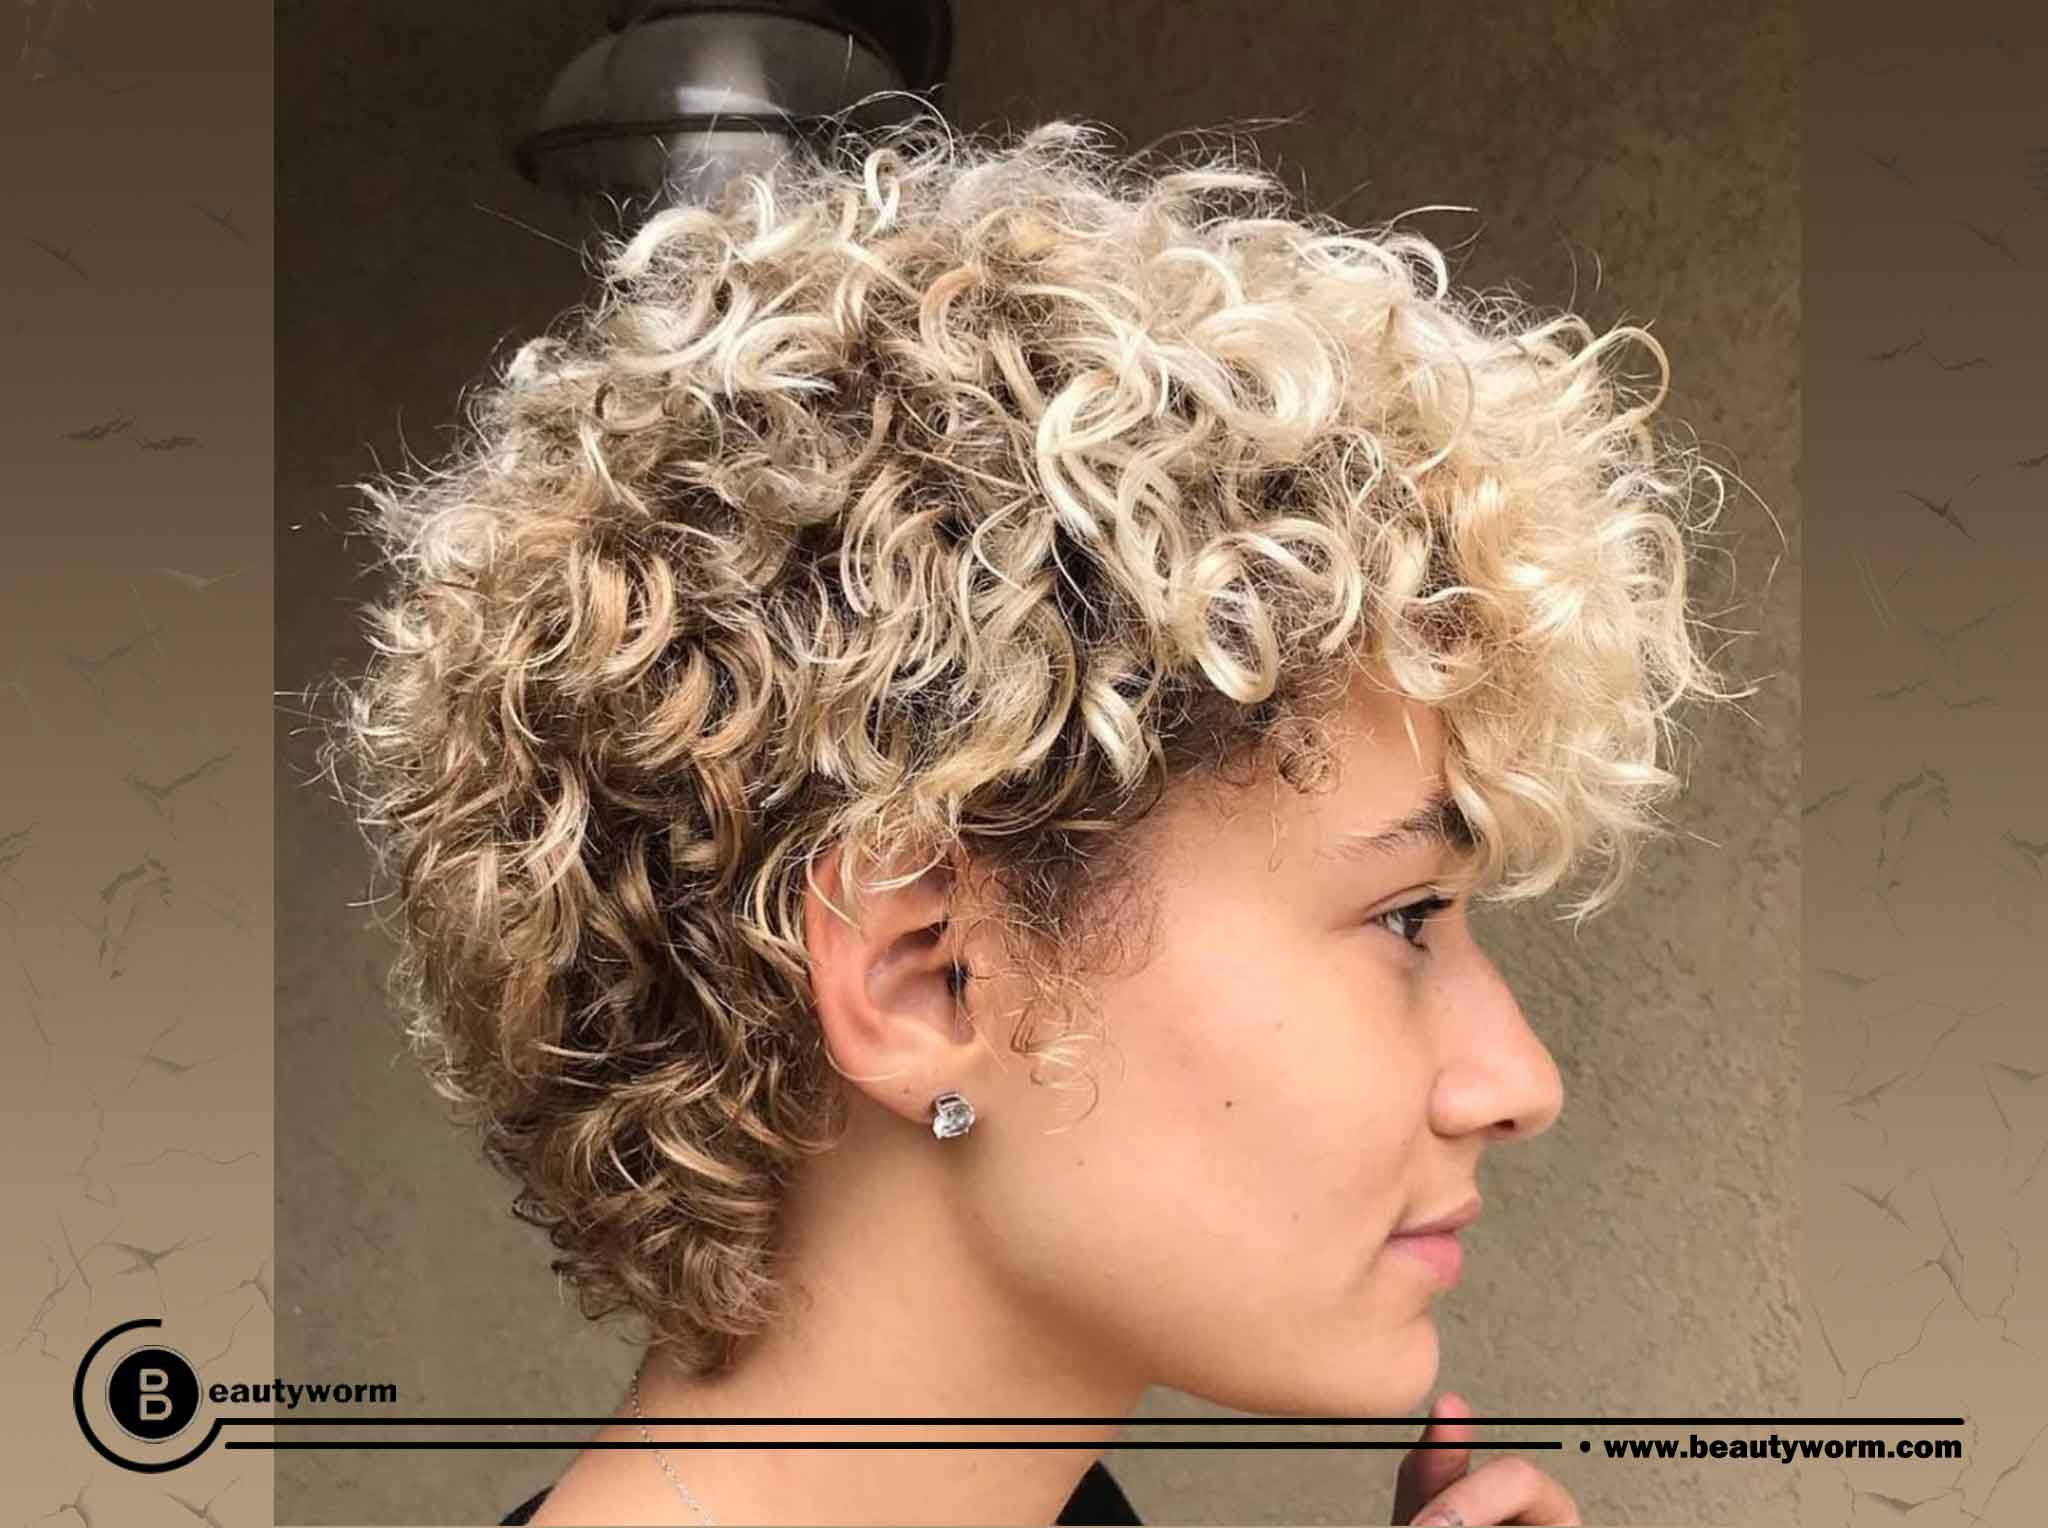 Curly Pixie